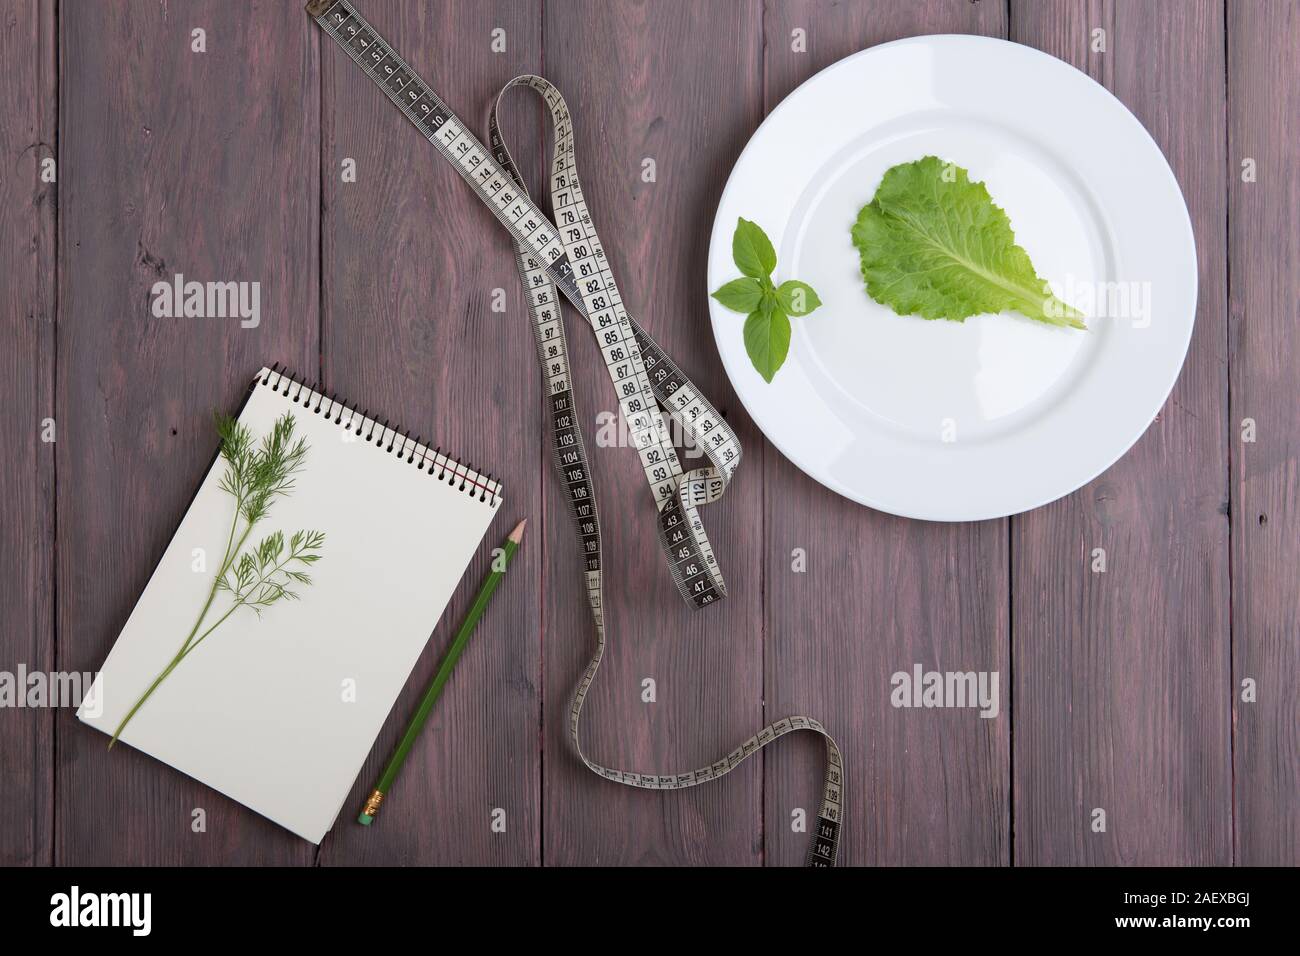 Healthy diet plan concept - blank notepad for recipe, measure tape, white plate with dill, salad lettuce, basil on wooden table Stock Photo